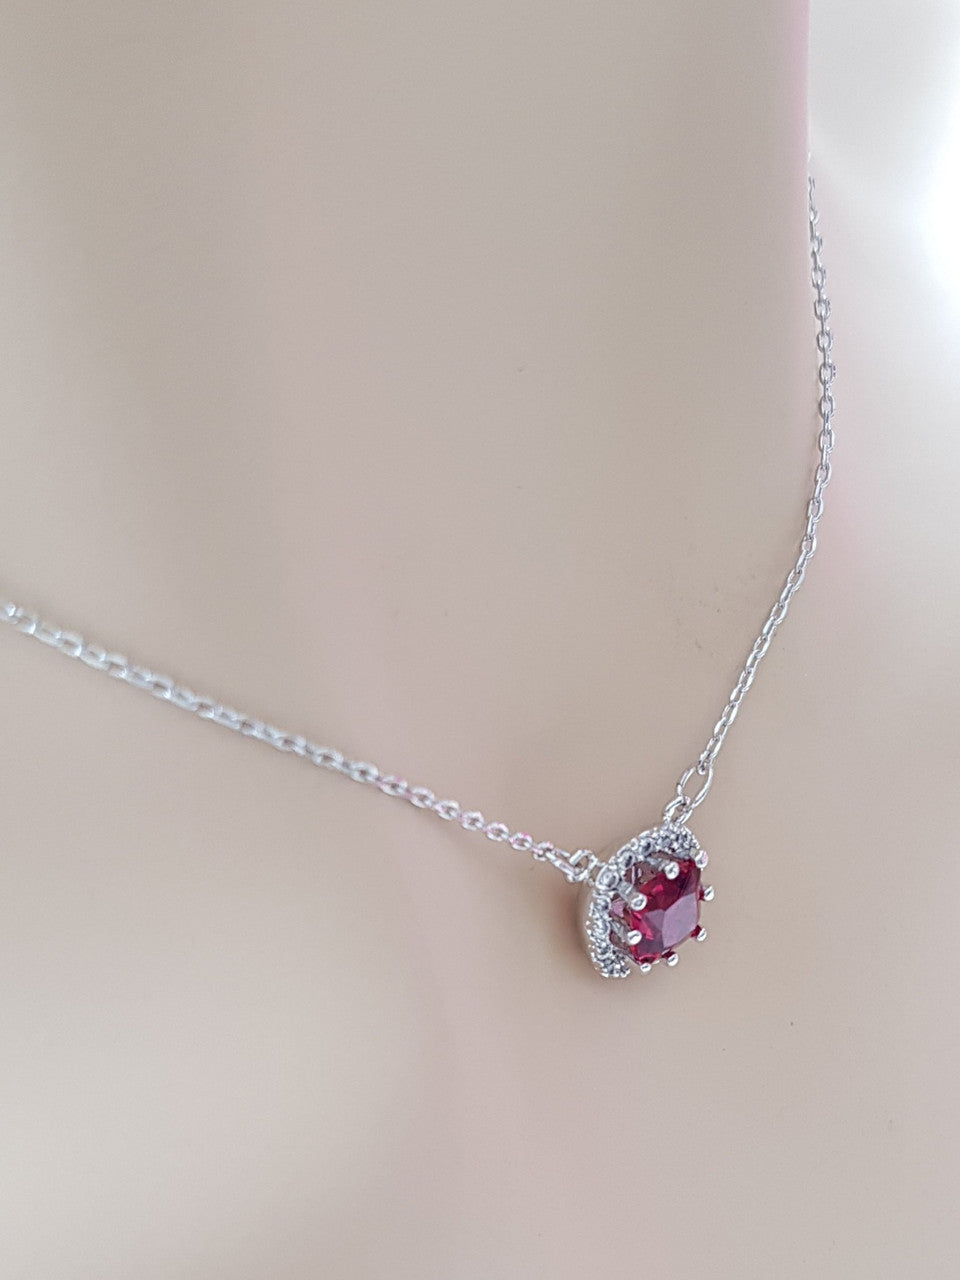 Red CZ Crystal Necklace-Azure Red